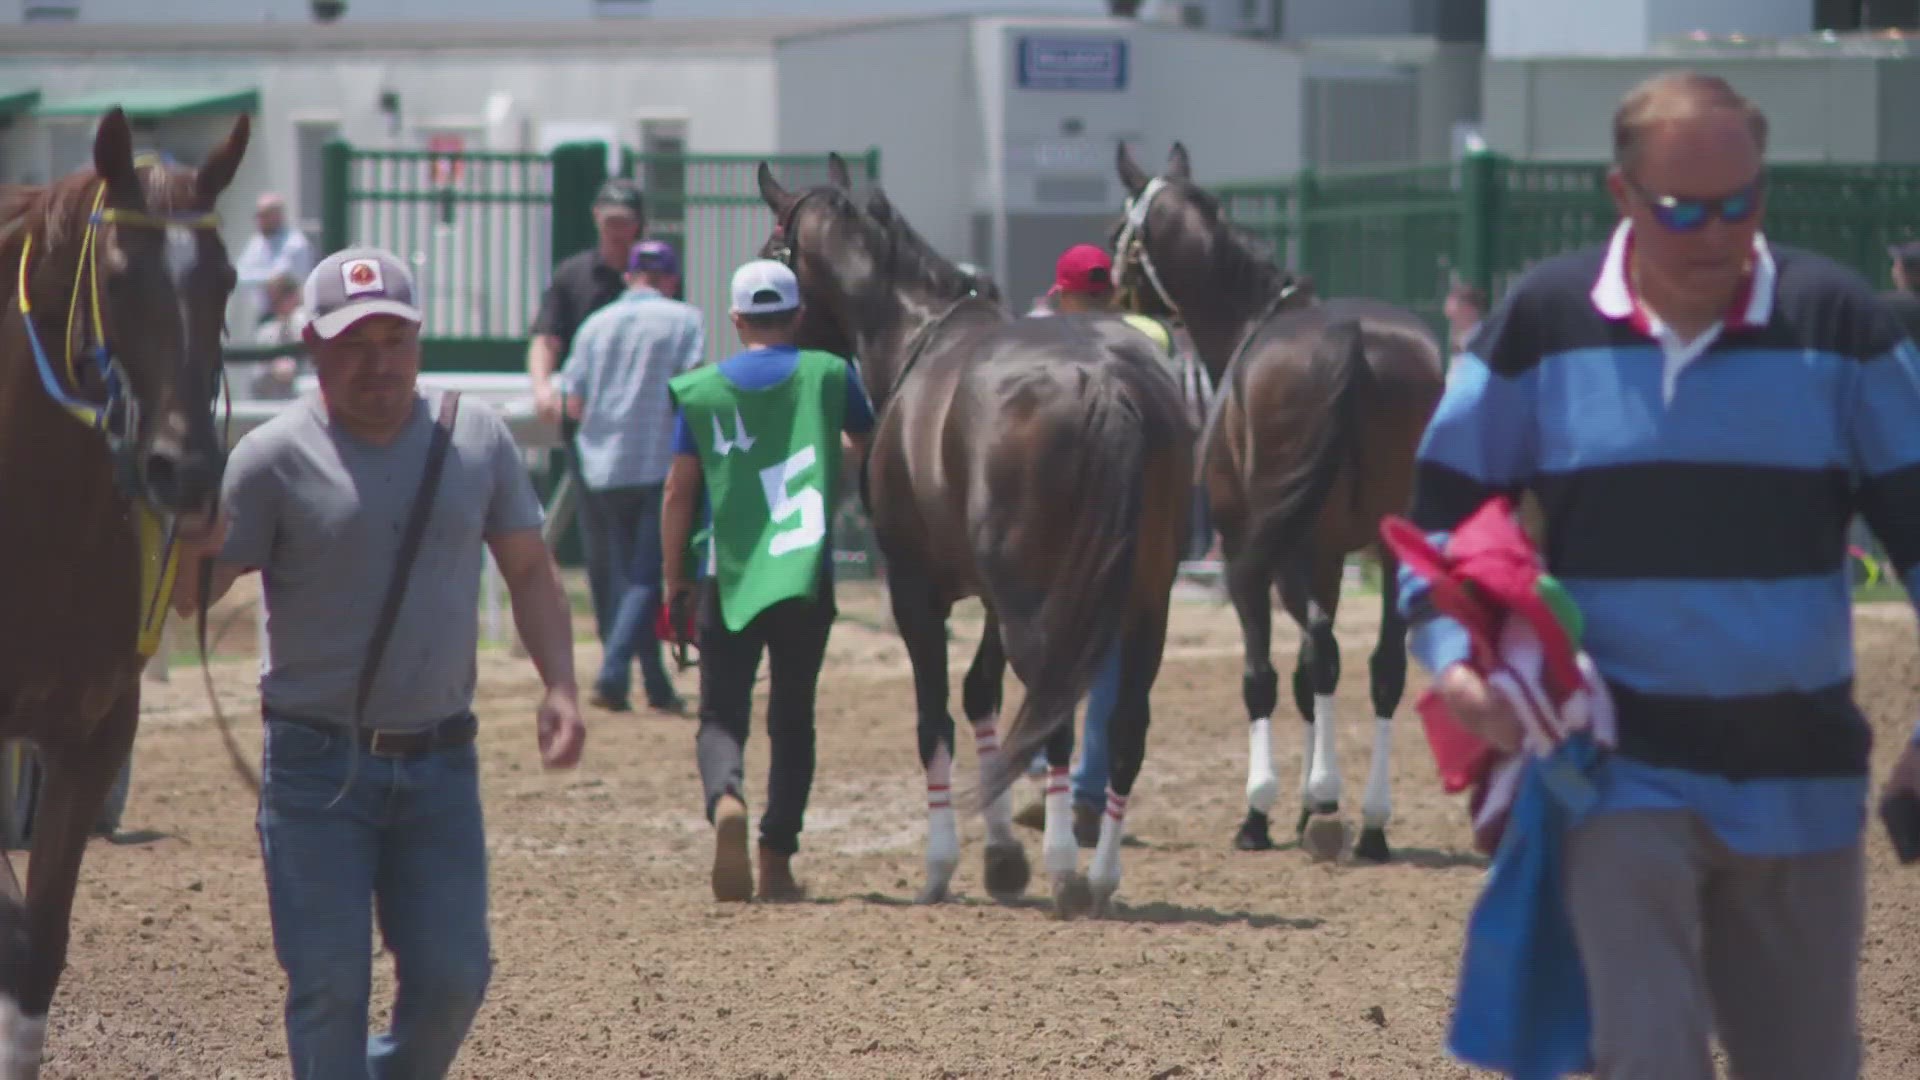 There are three main measures that will start immediately at the track.